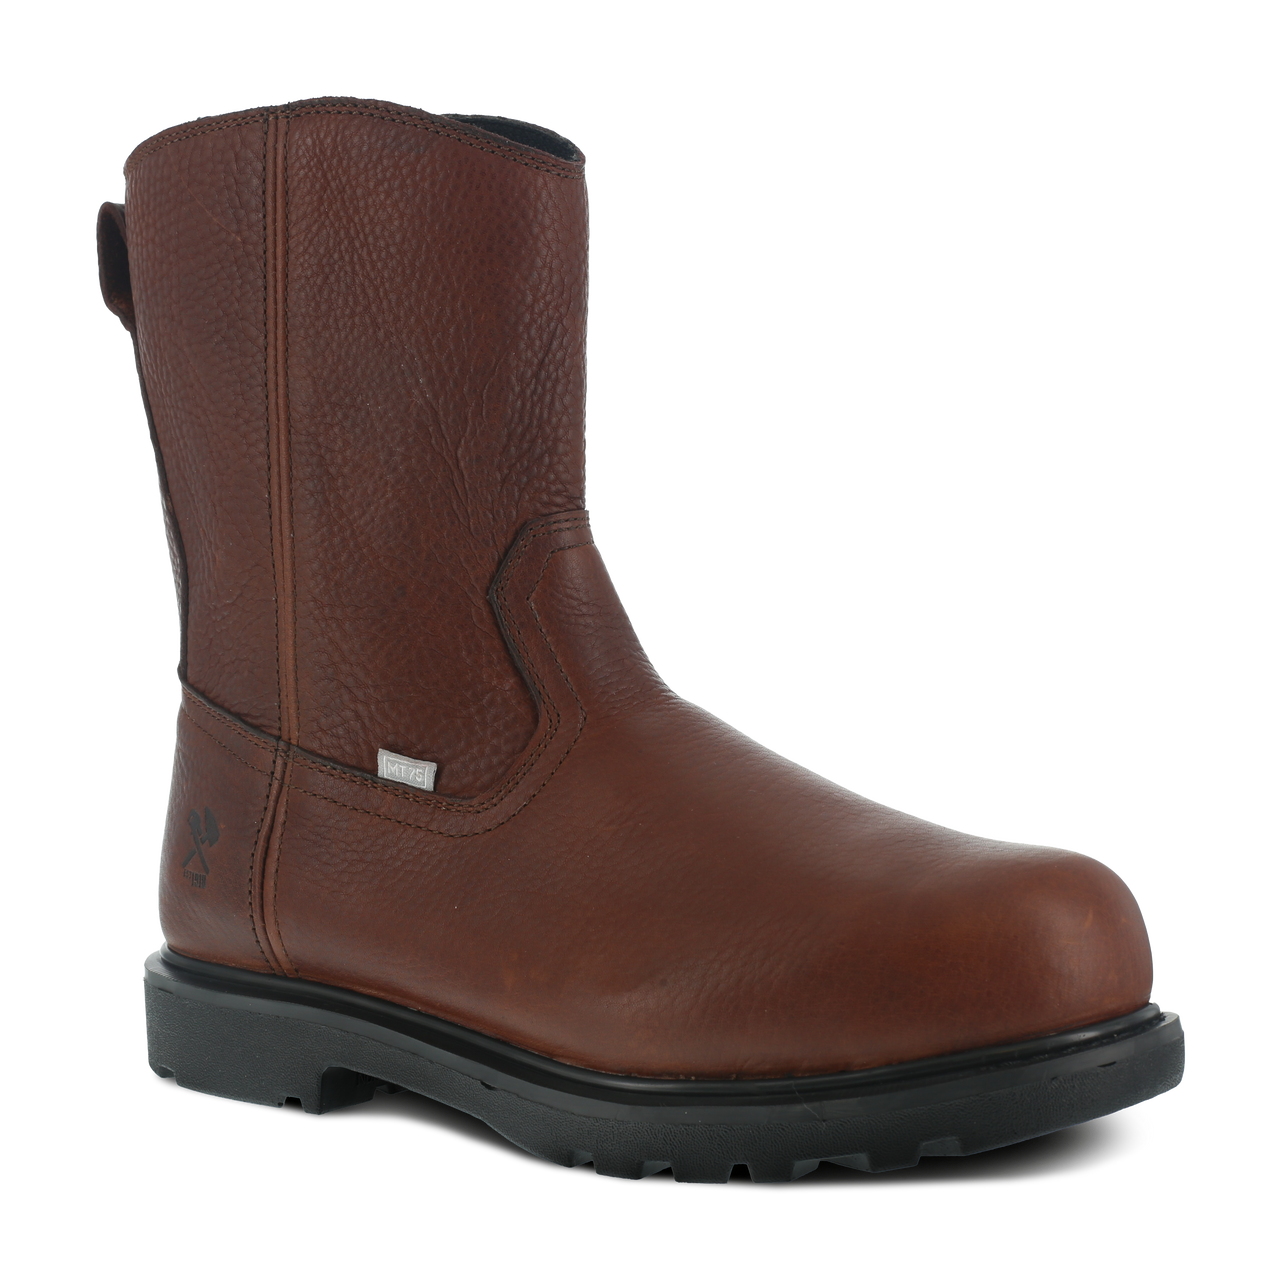 Red Wing Steel Toe Metatarsal Boots | ppgbbe.intranet.biologia.ufrj.br